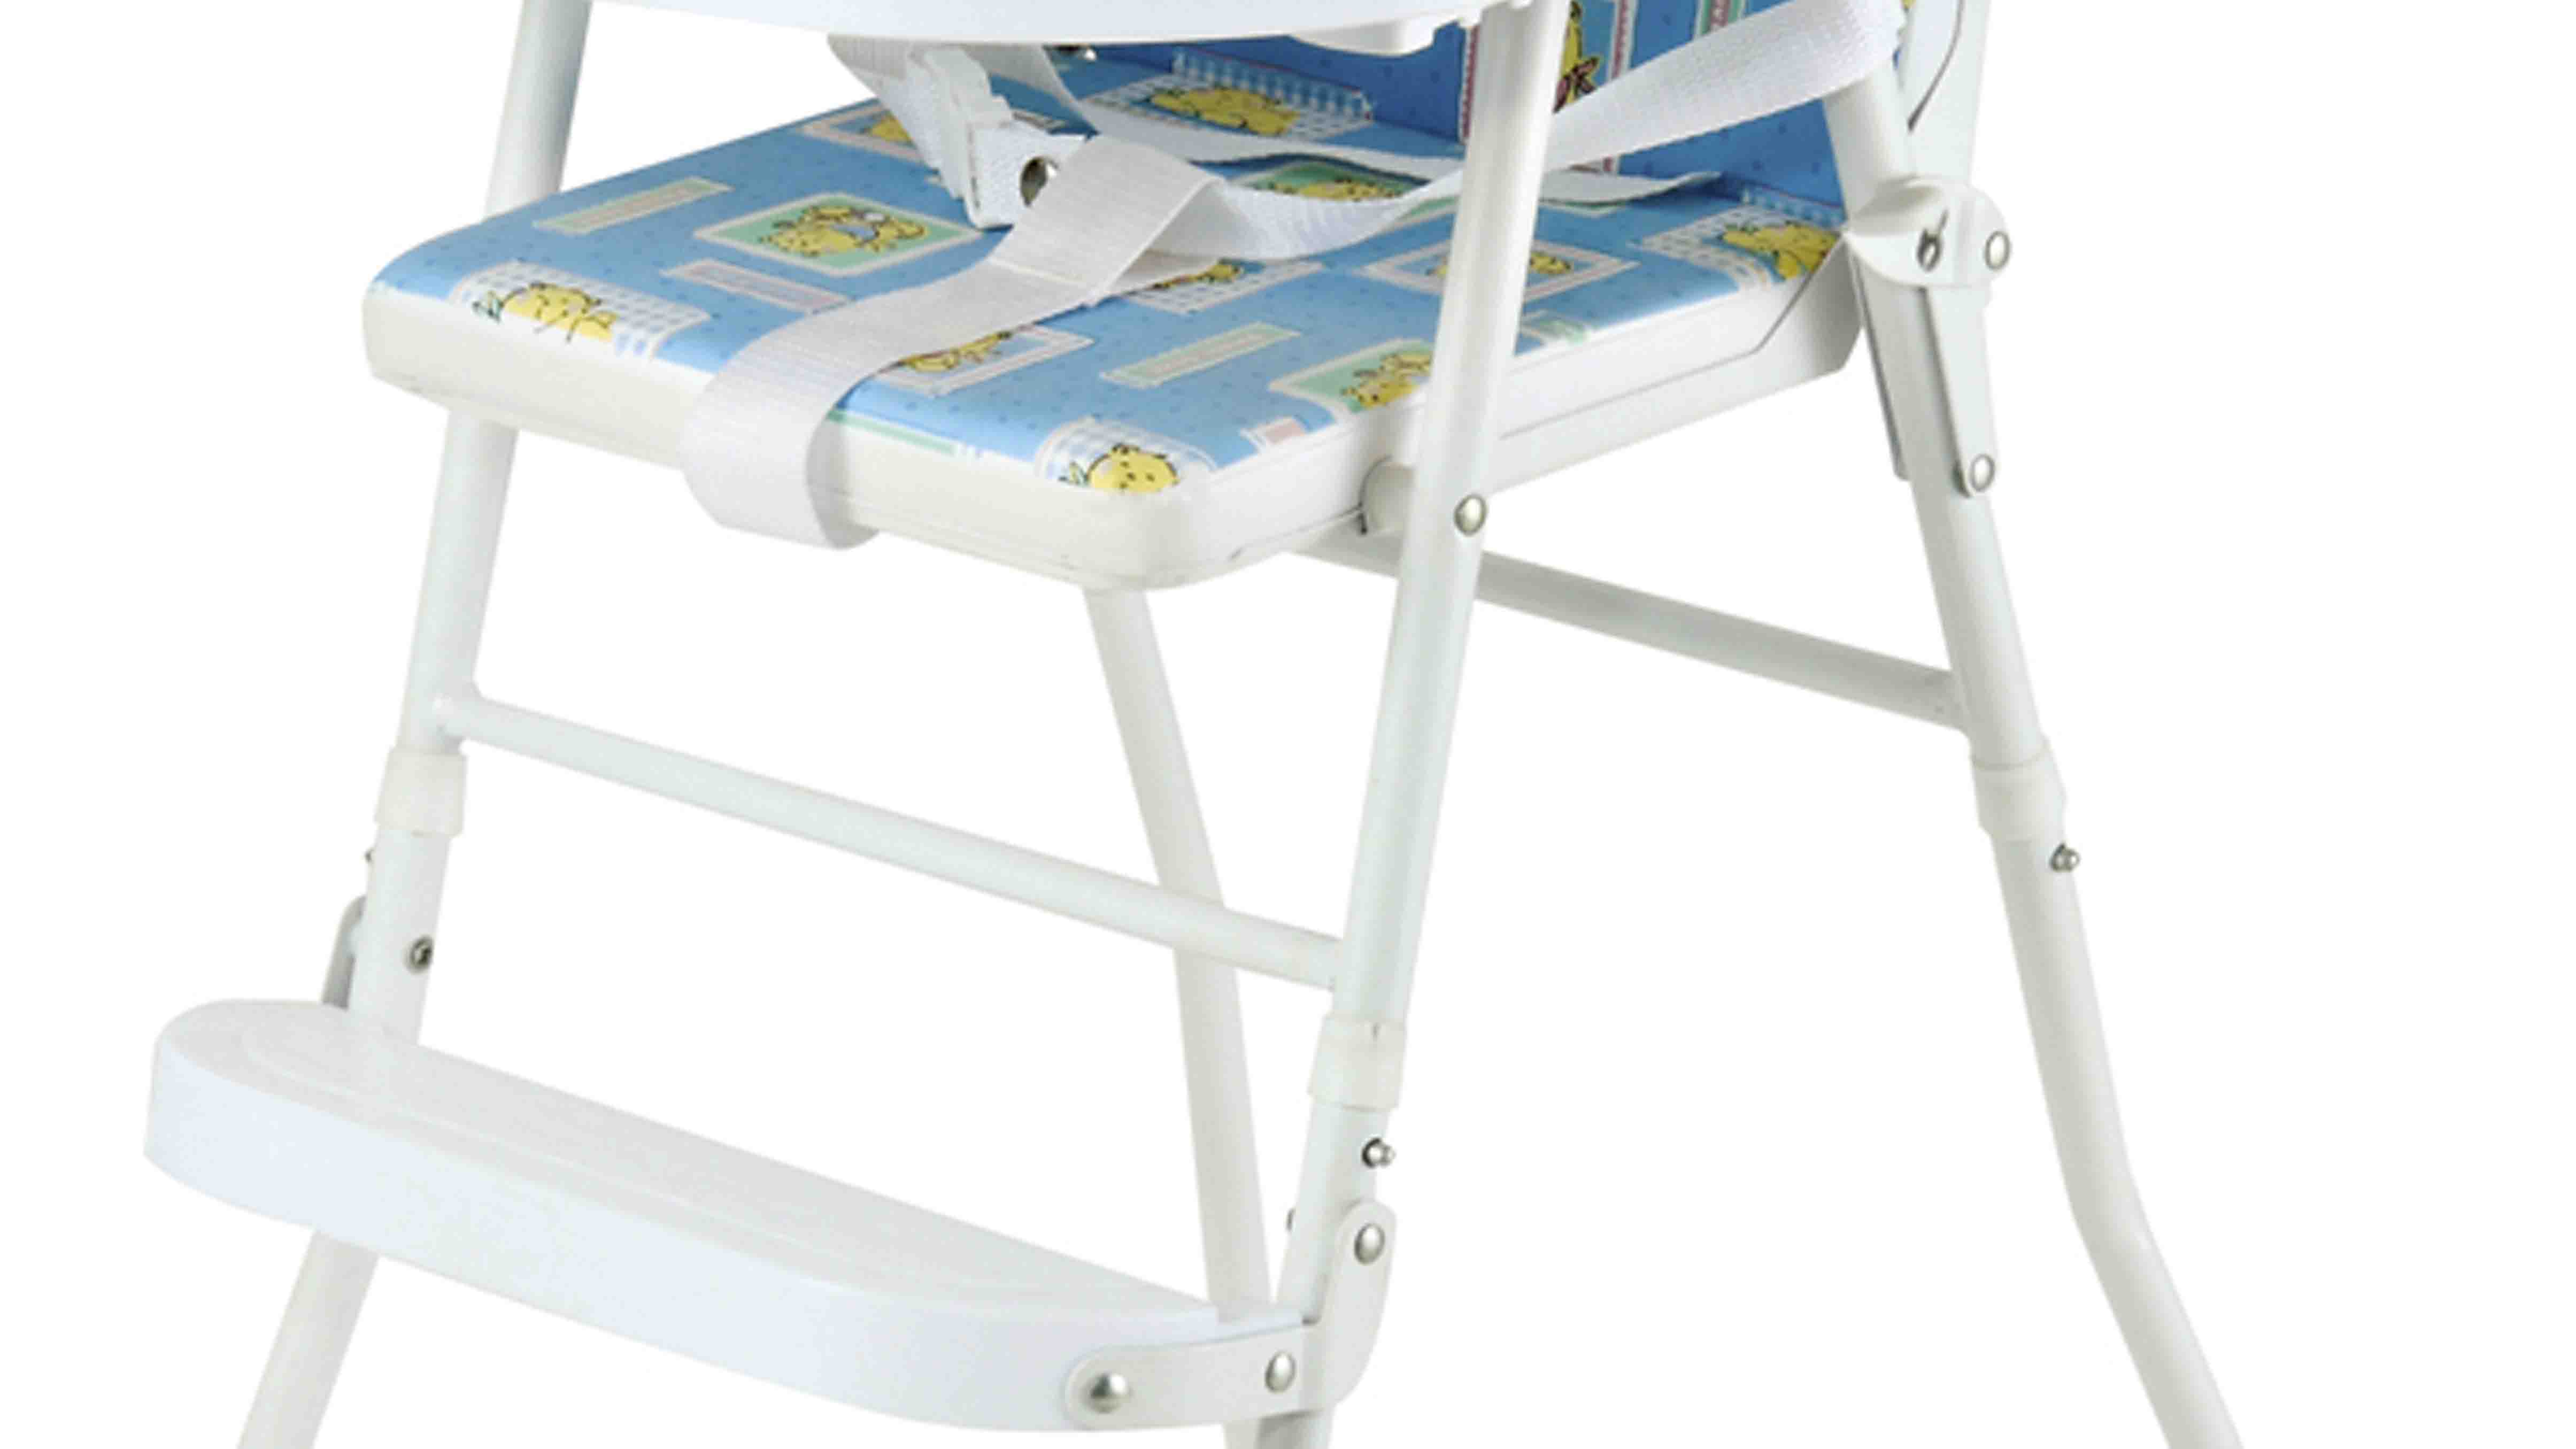 Aoqi plastic baby high chair with wheels manufacturer for livingroom